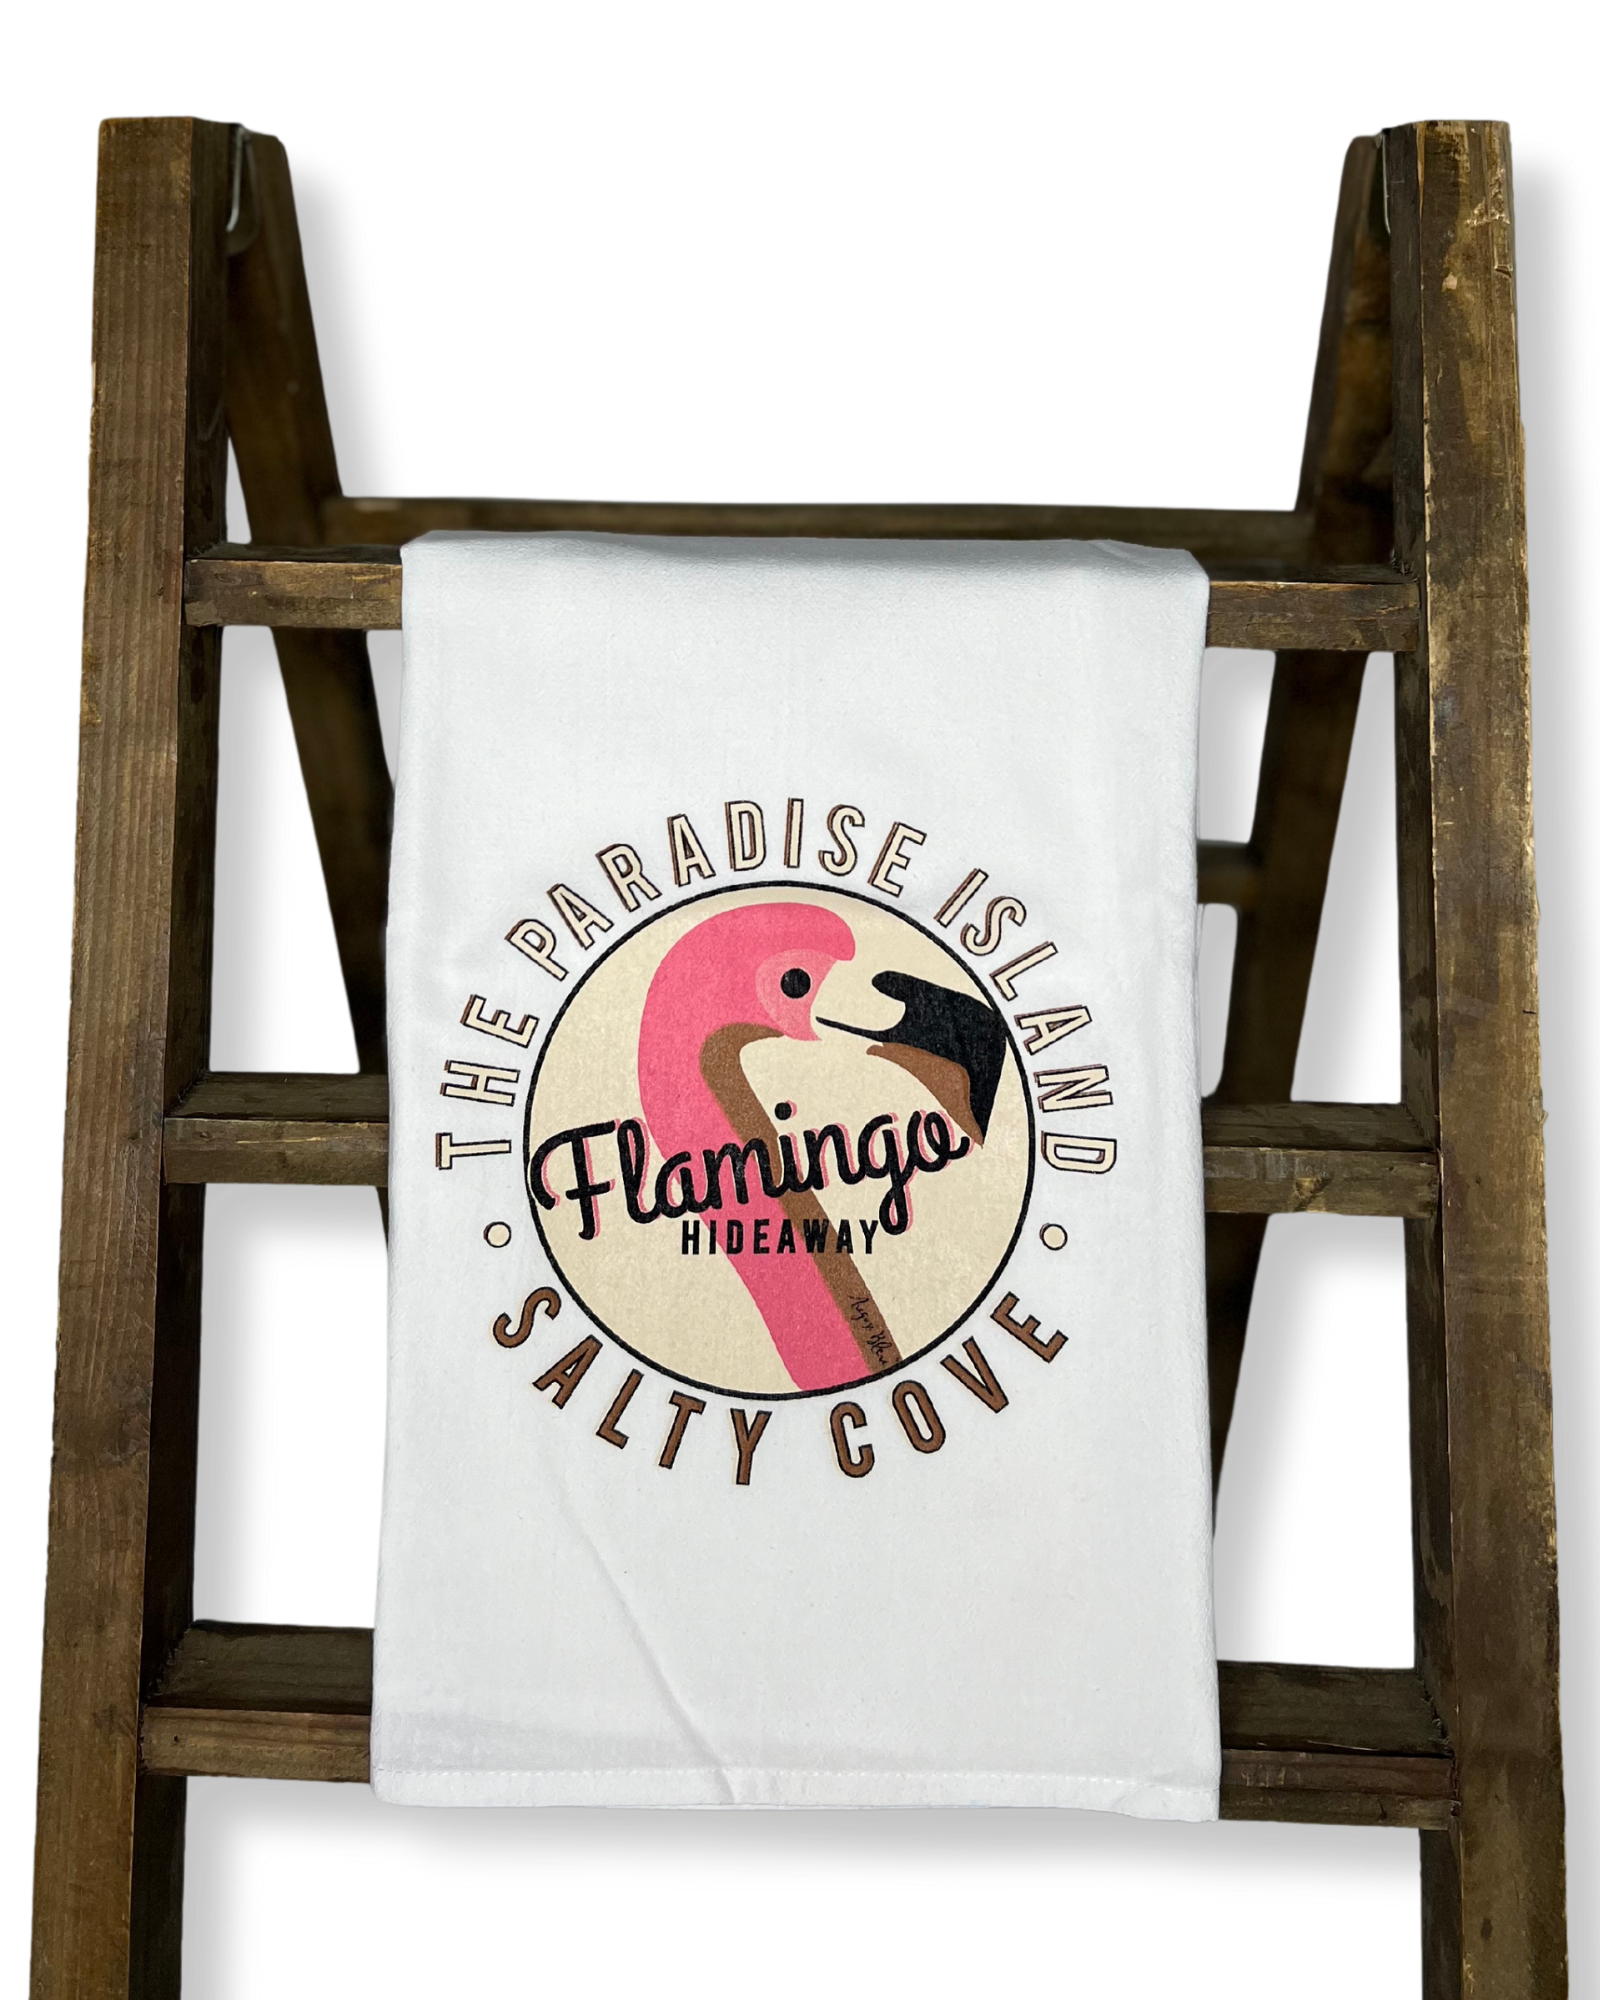 The Paradise Island Salty Cove flamingo hideaway graphic with flamingo art work on a white kitchen tea towel 